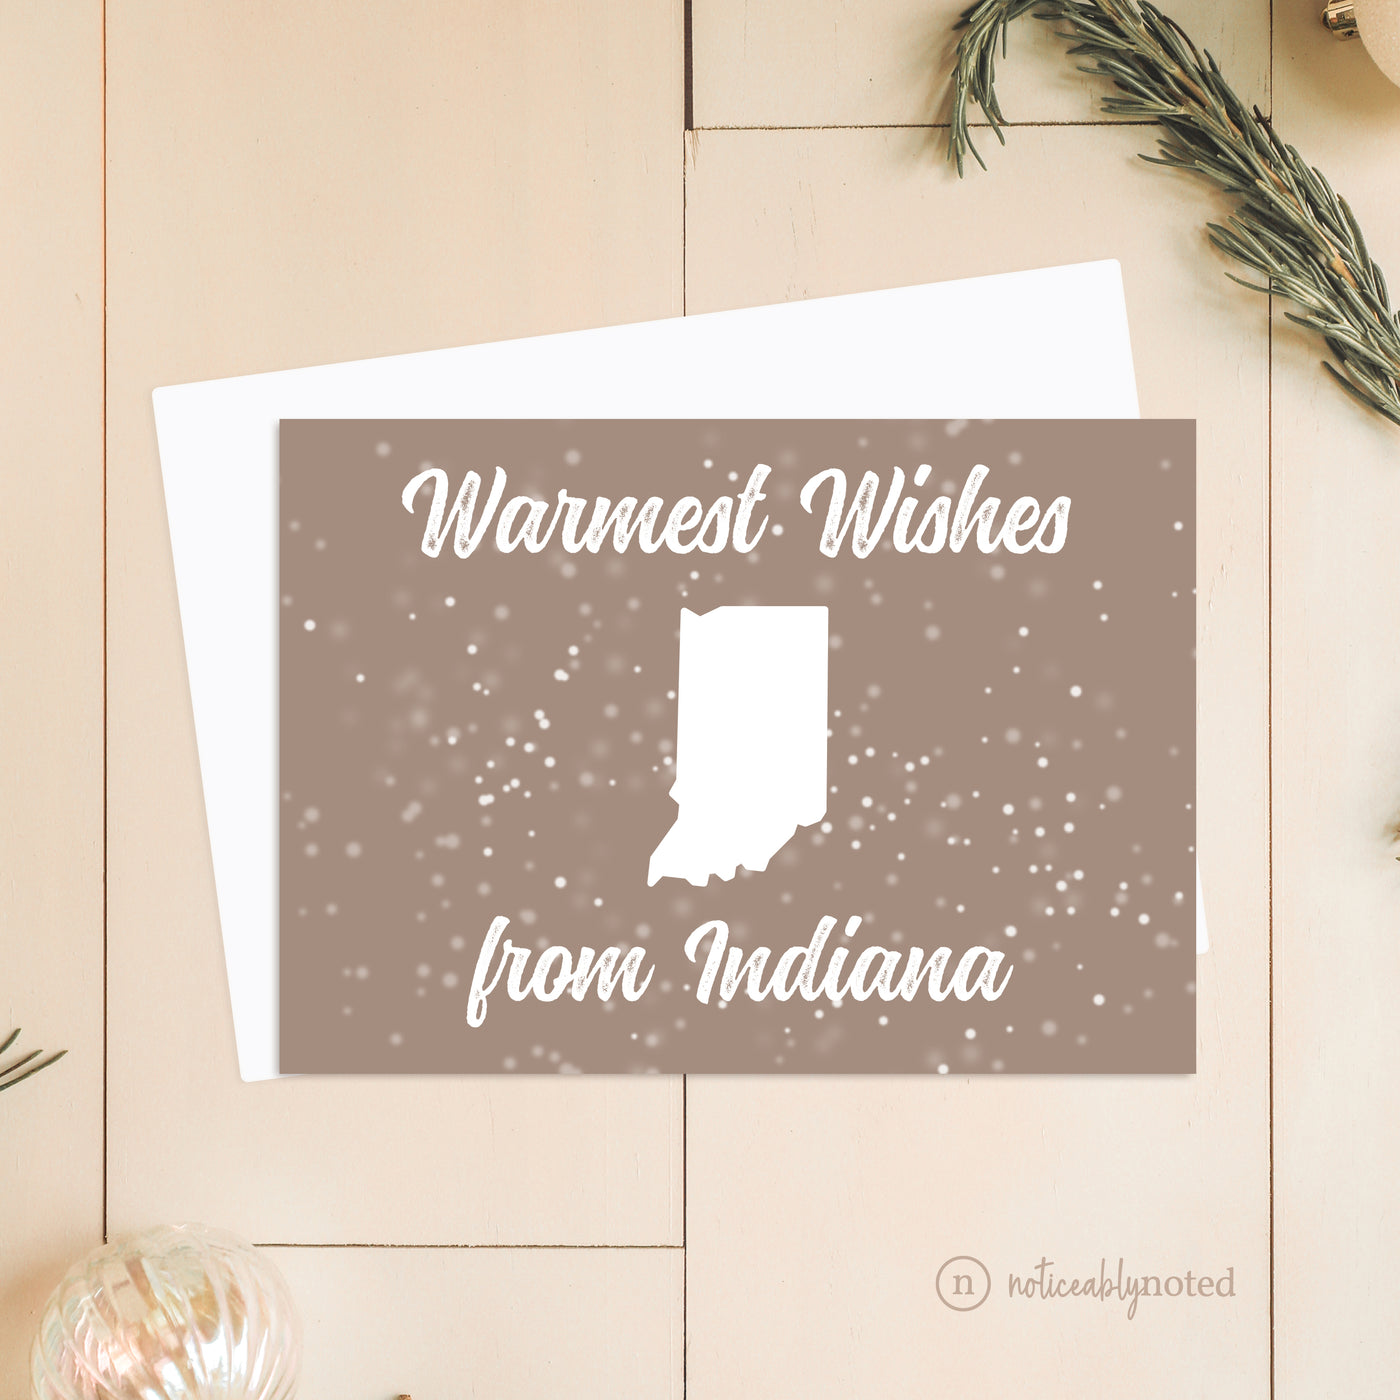 IN Christmas Card | Noticeably Noted